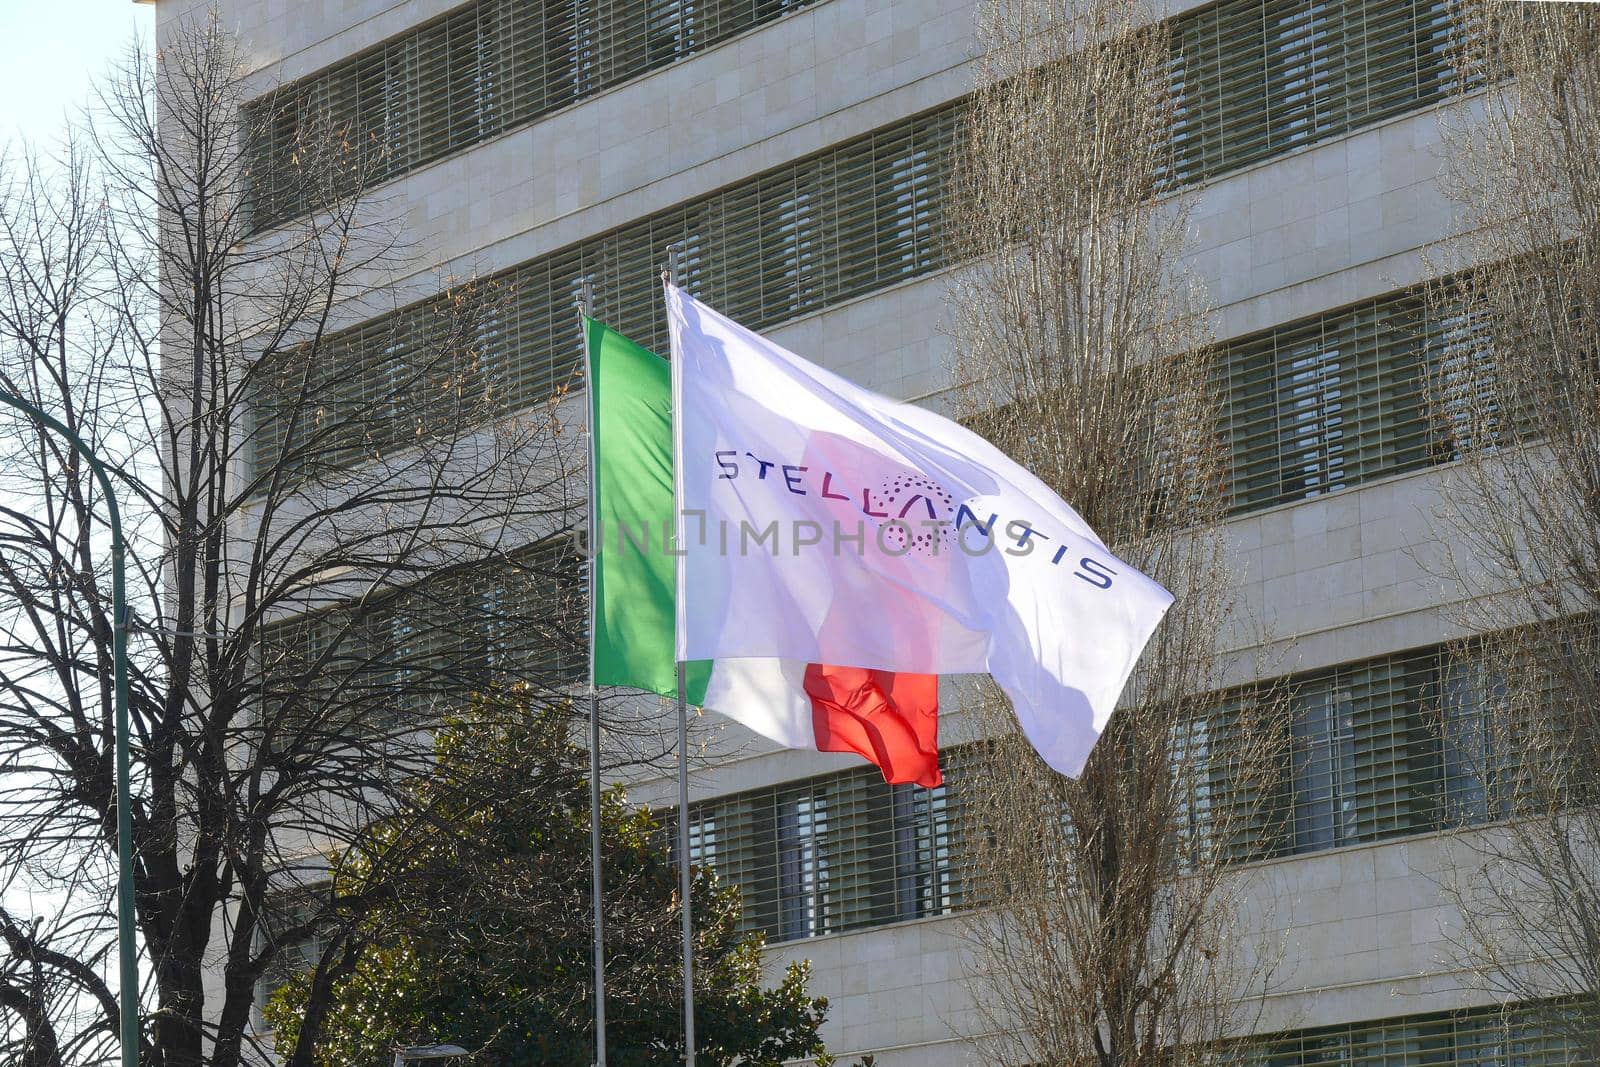 Stellantis corporation flag at italian headquarters after merging between Groupe PSA and FCA automotive Turin Italy January 25 2021 by lemar